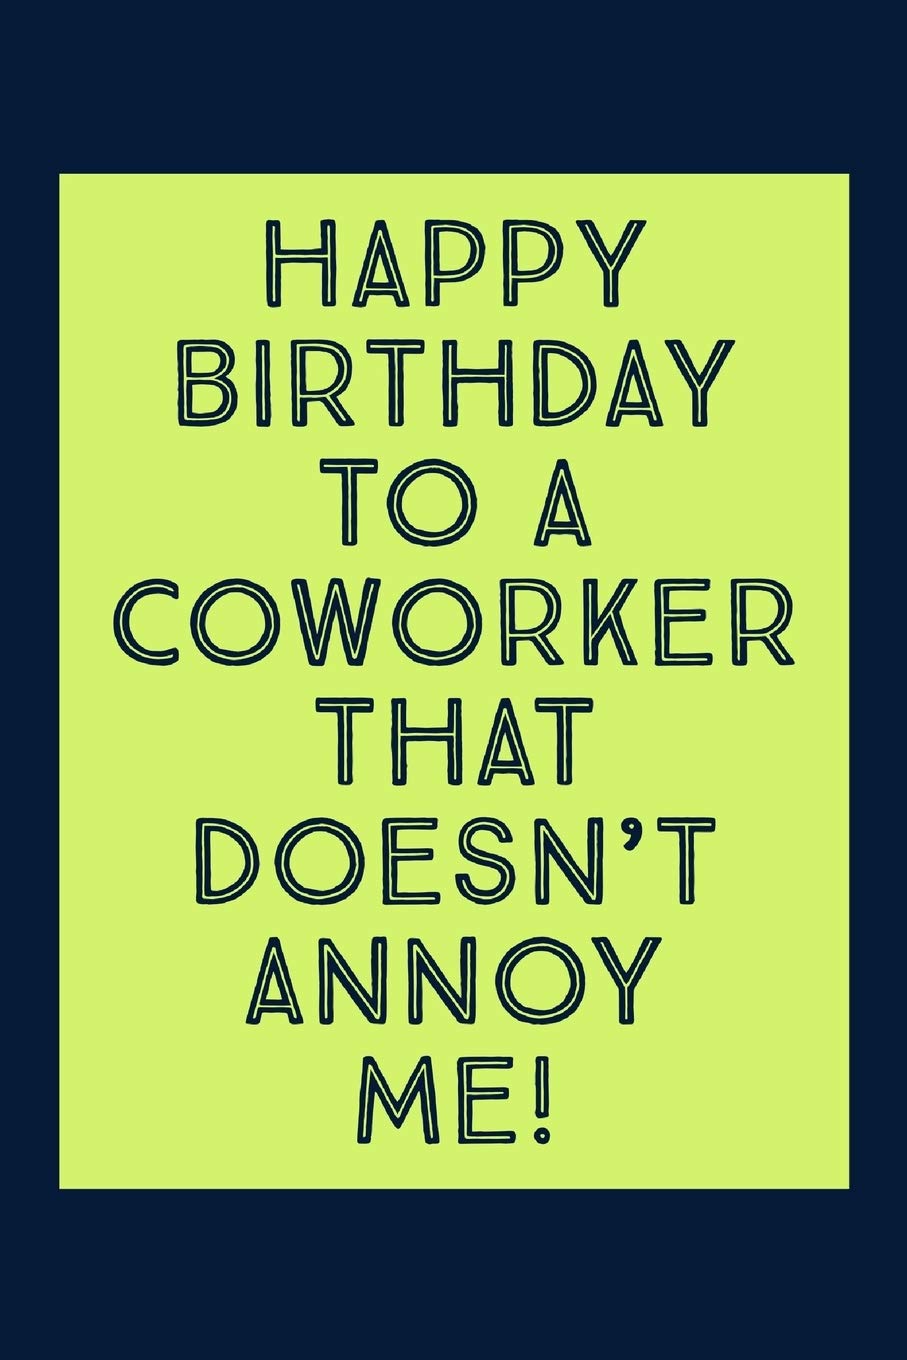 60-cool-birthday-wishes-for-coworker-birthday-images